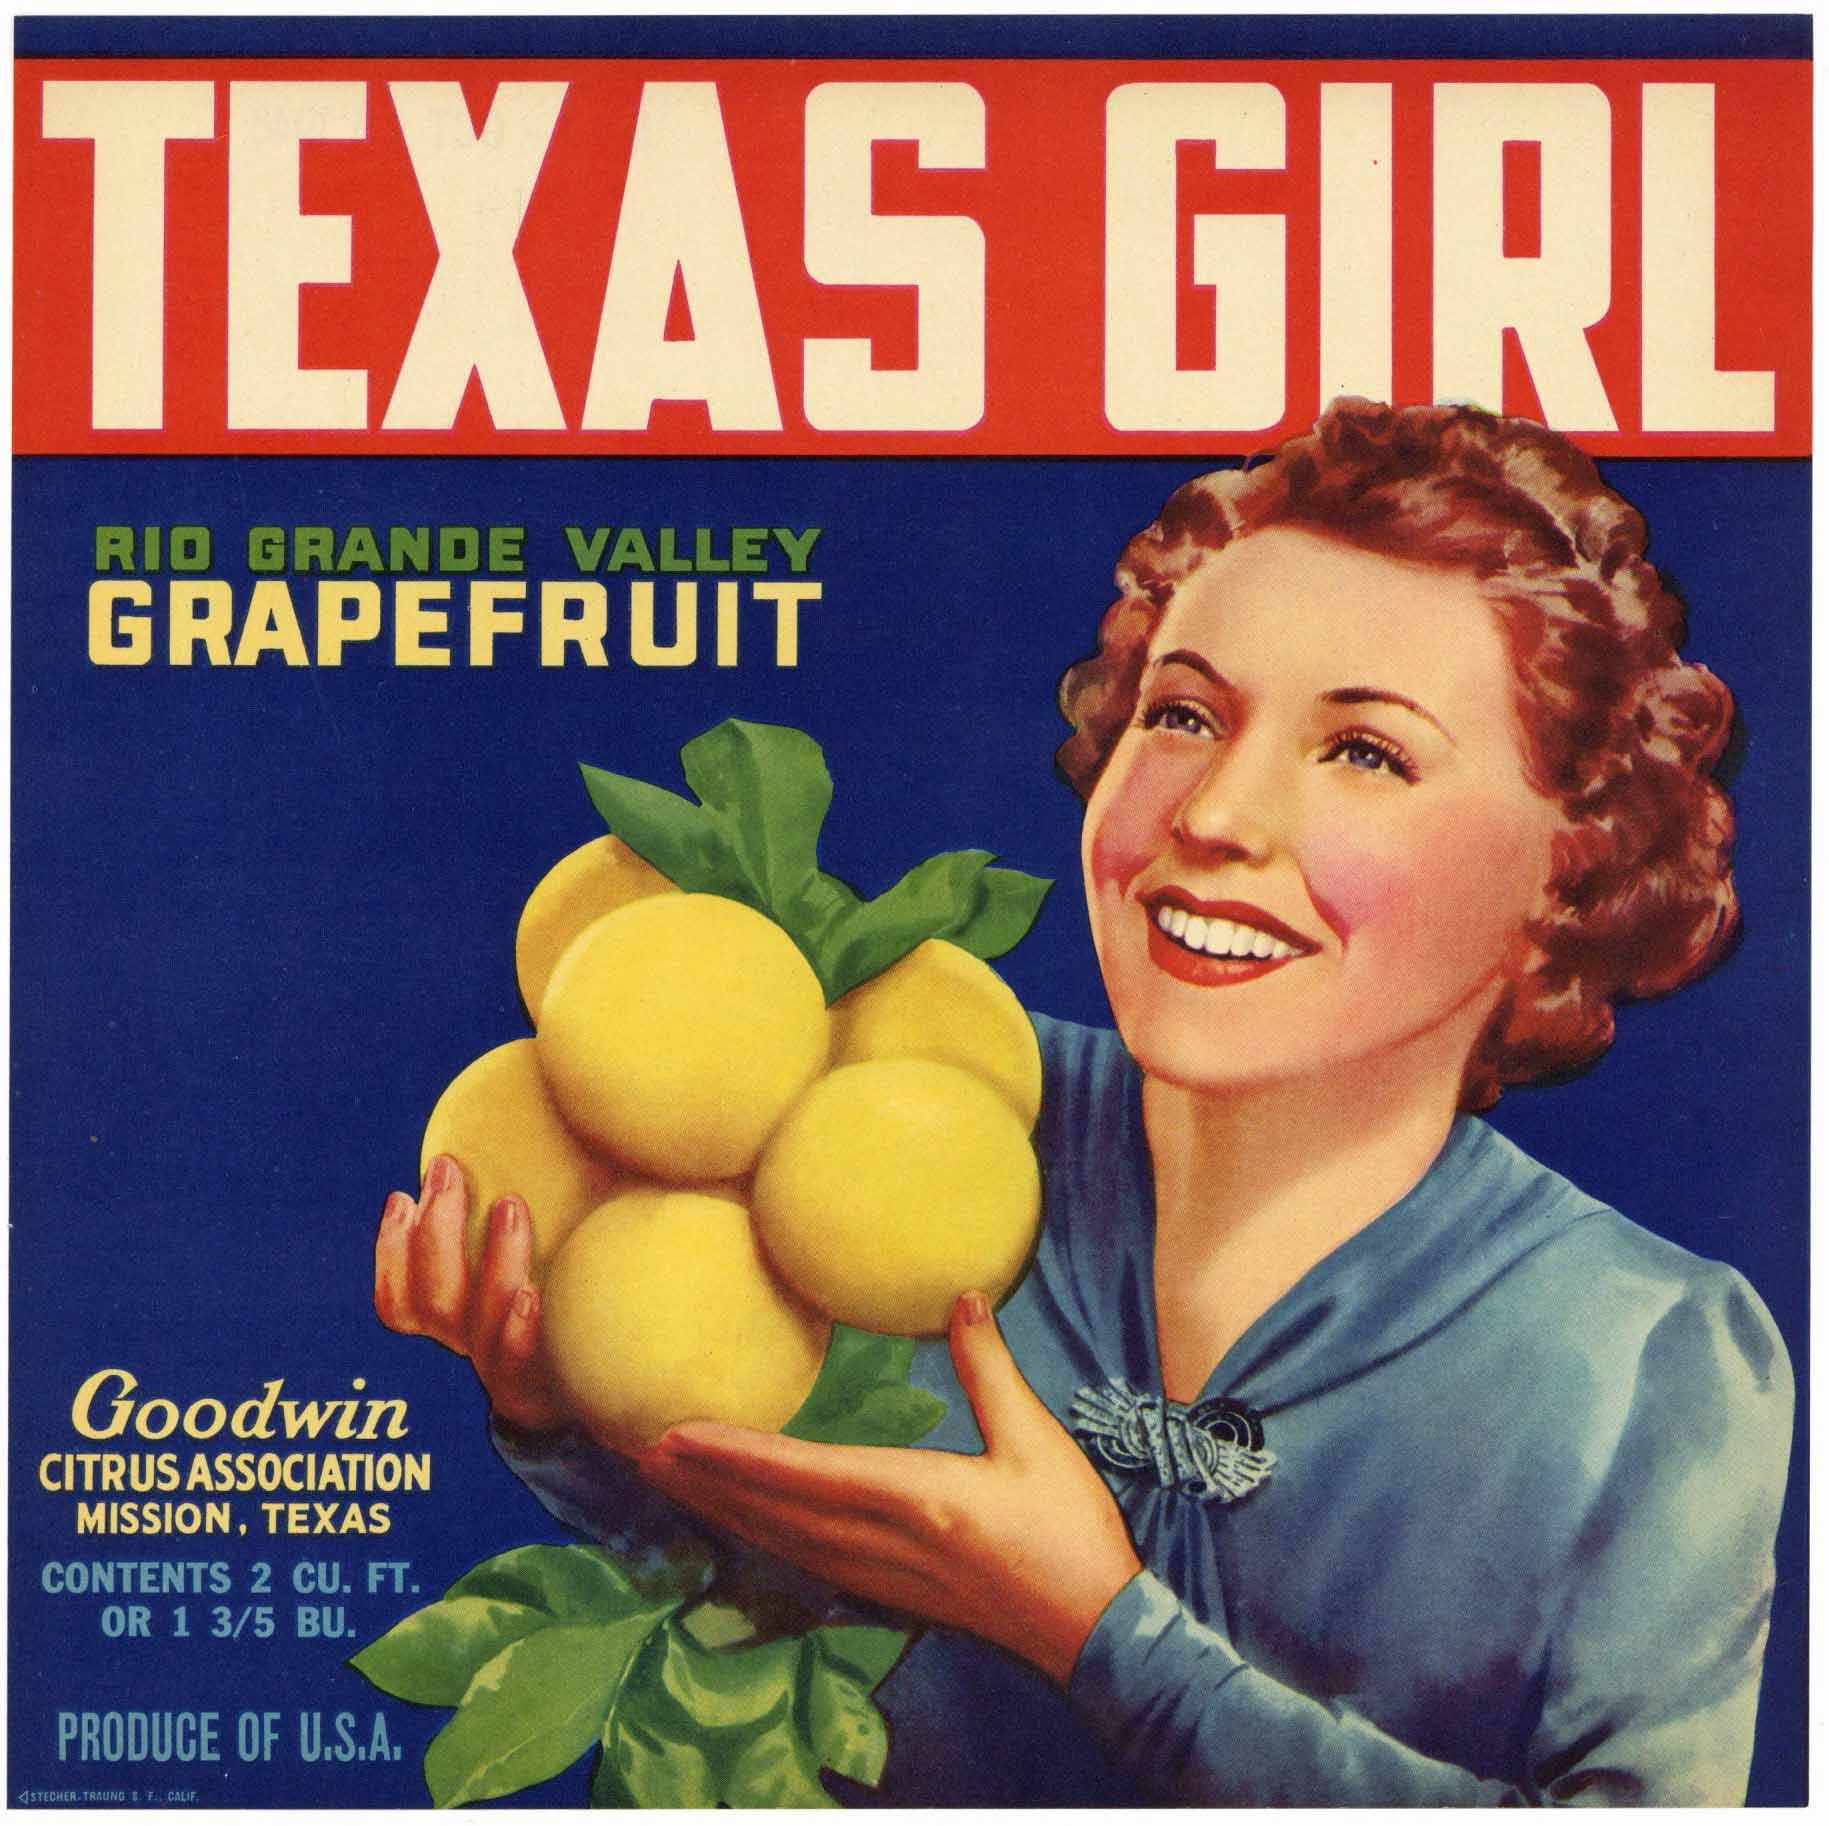 Texas Girl Brand Vintage Mission Texas Grapefruit Crate Label